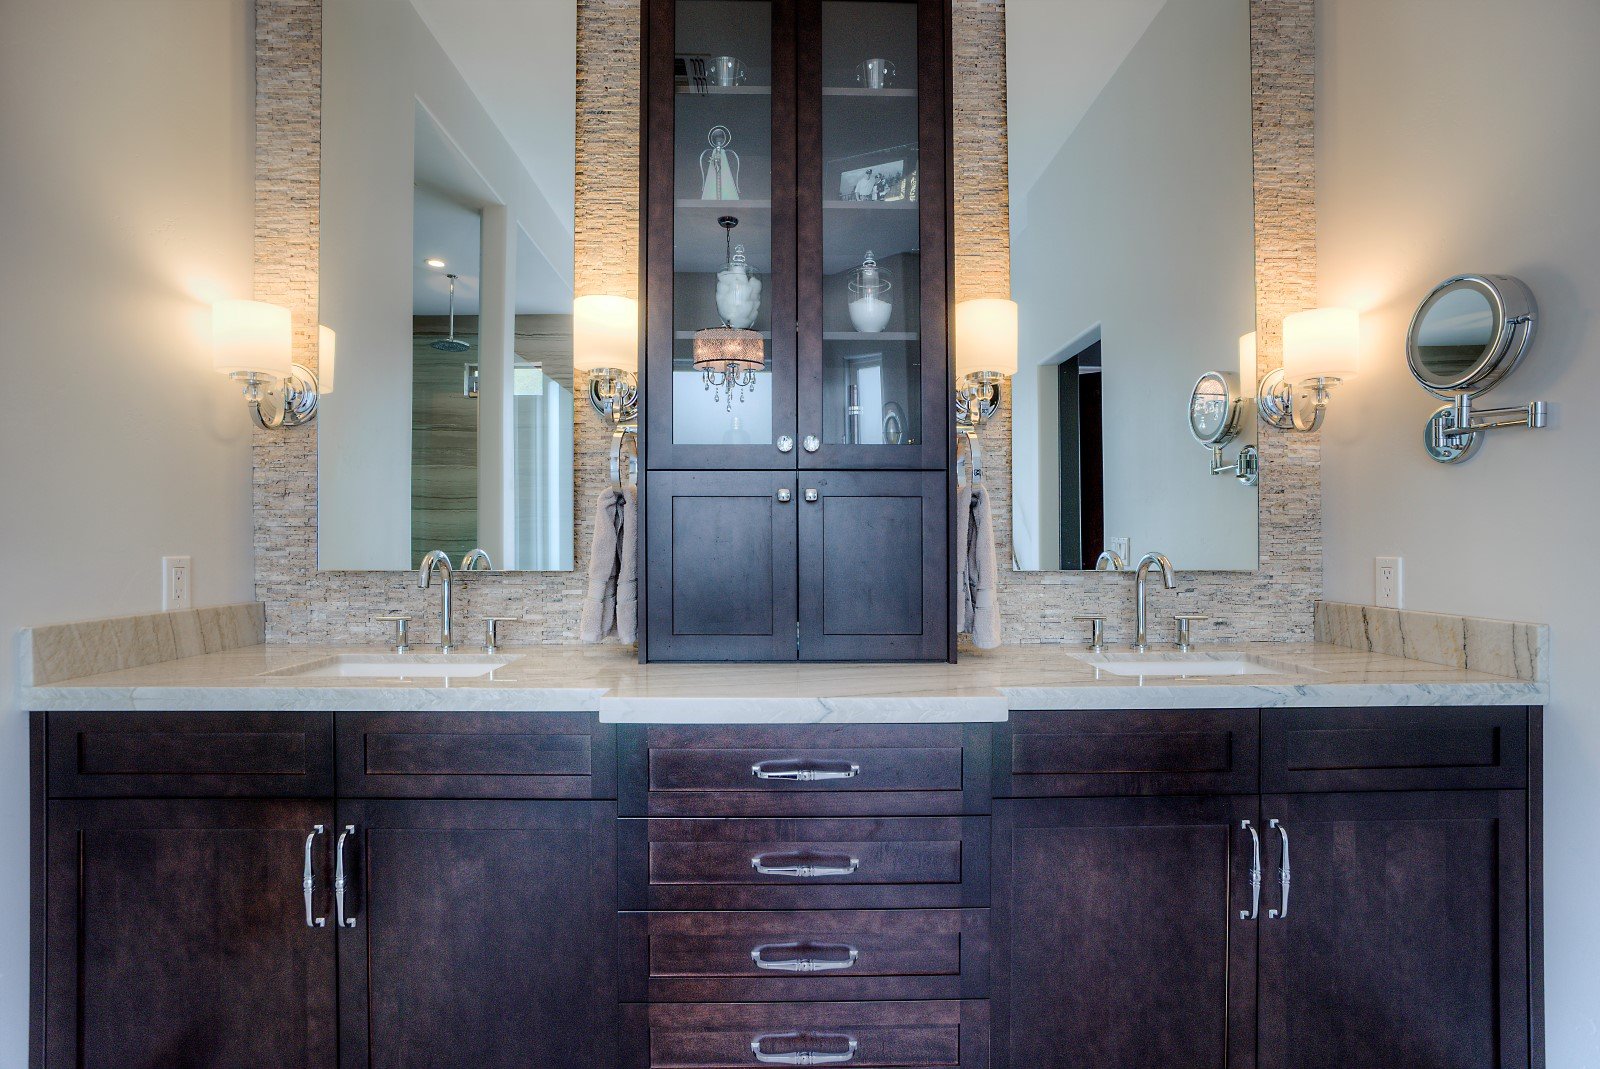 Bathroom with dark wood cabinets and double vanity